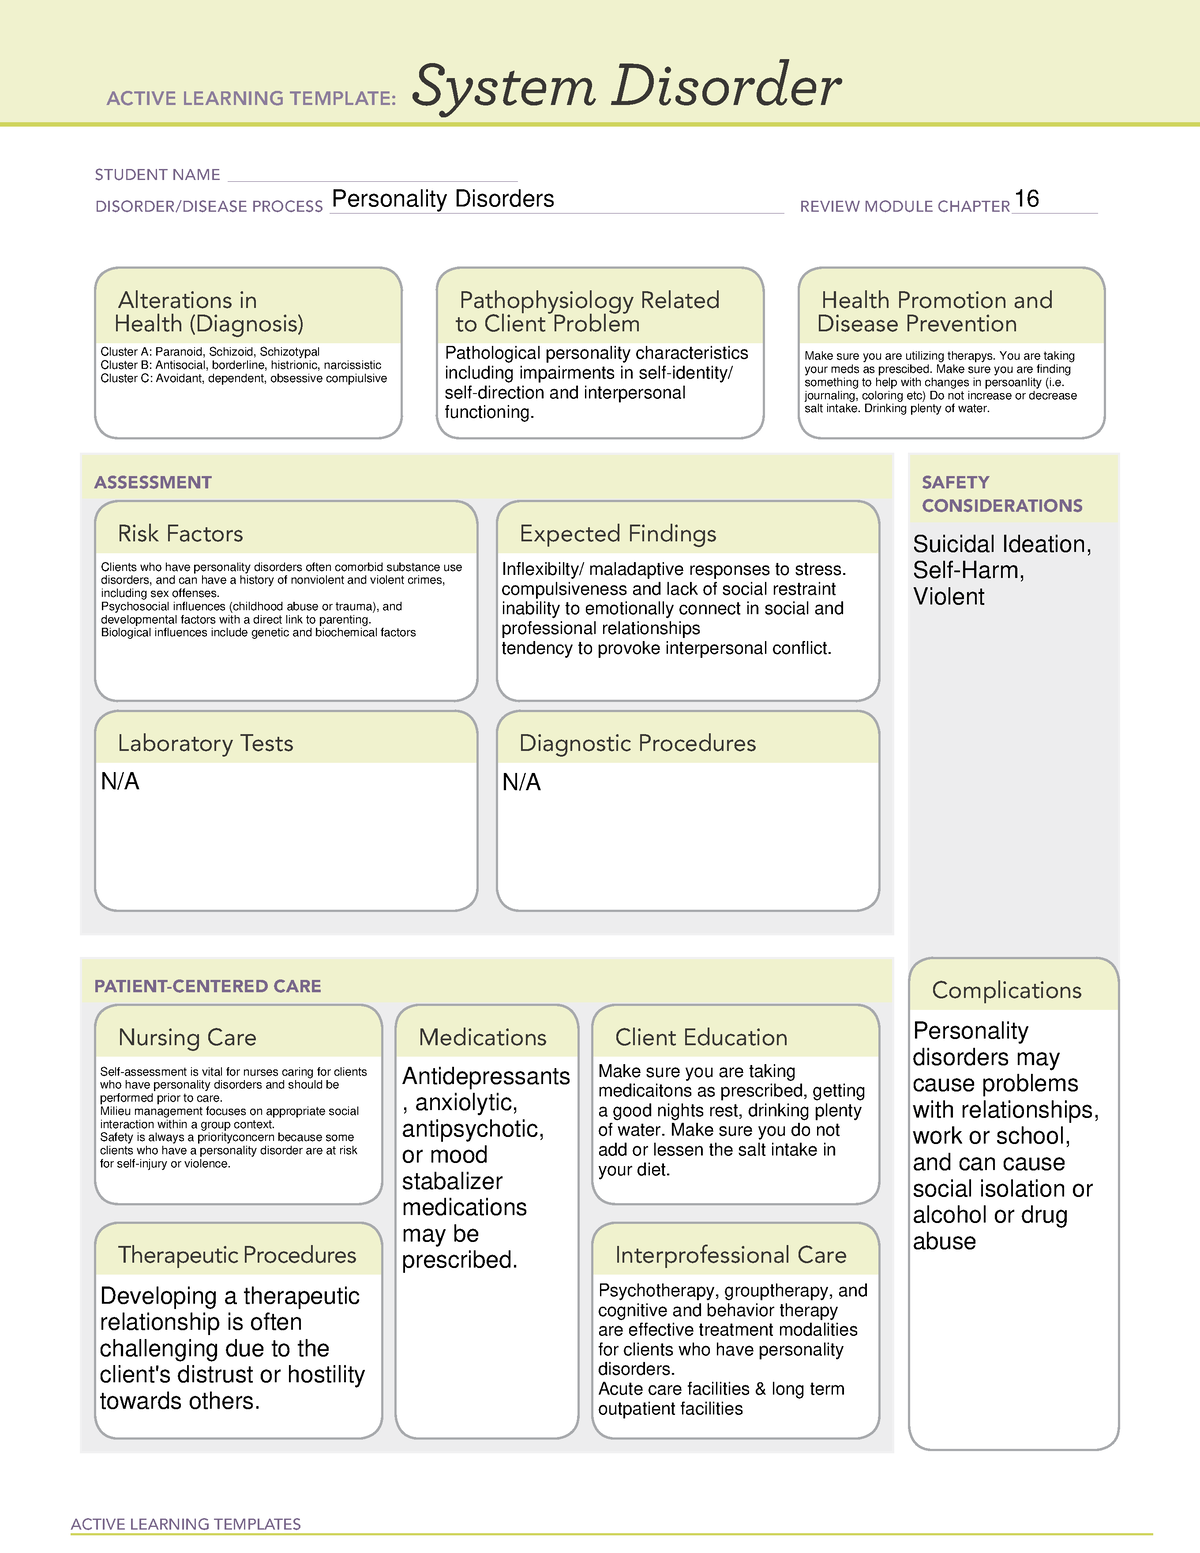 system-disorder-personality-disorder-active-learning-templates-system-disorder-student-name